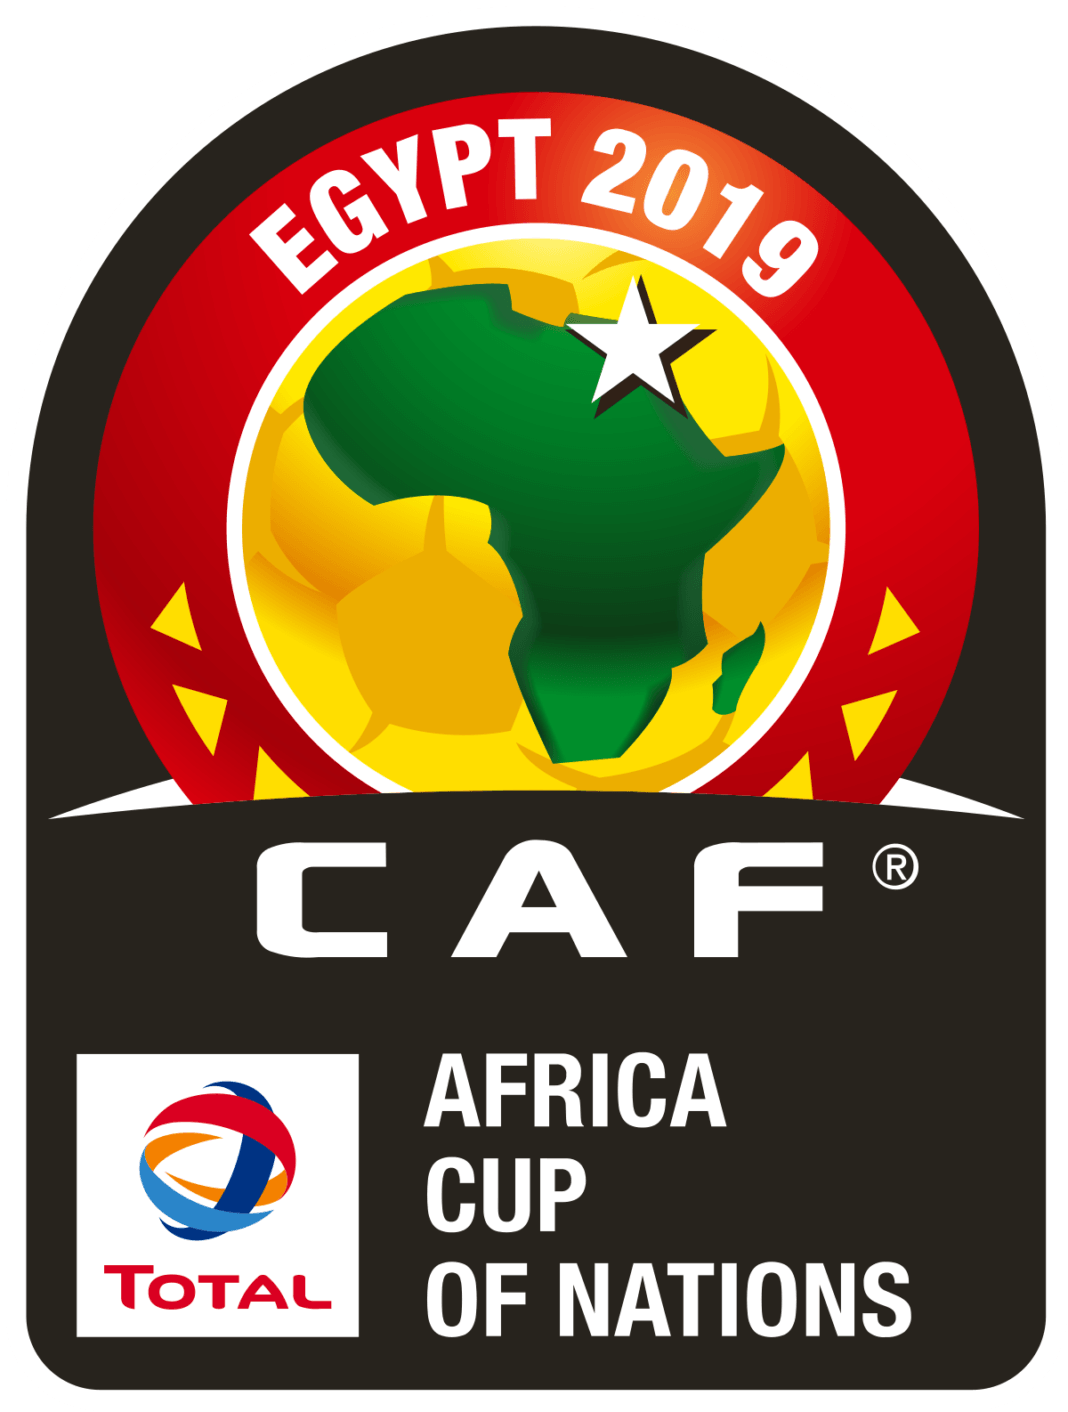 AfCON reverts to January/February